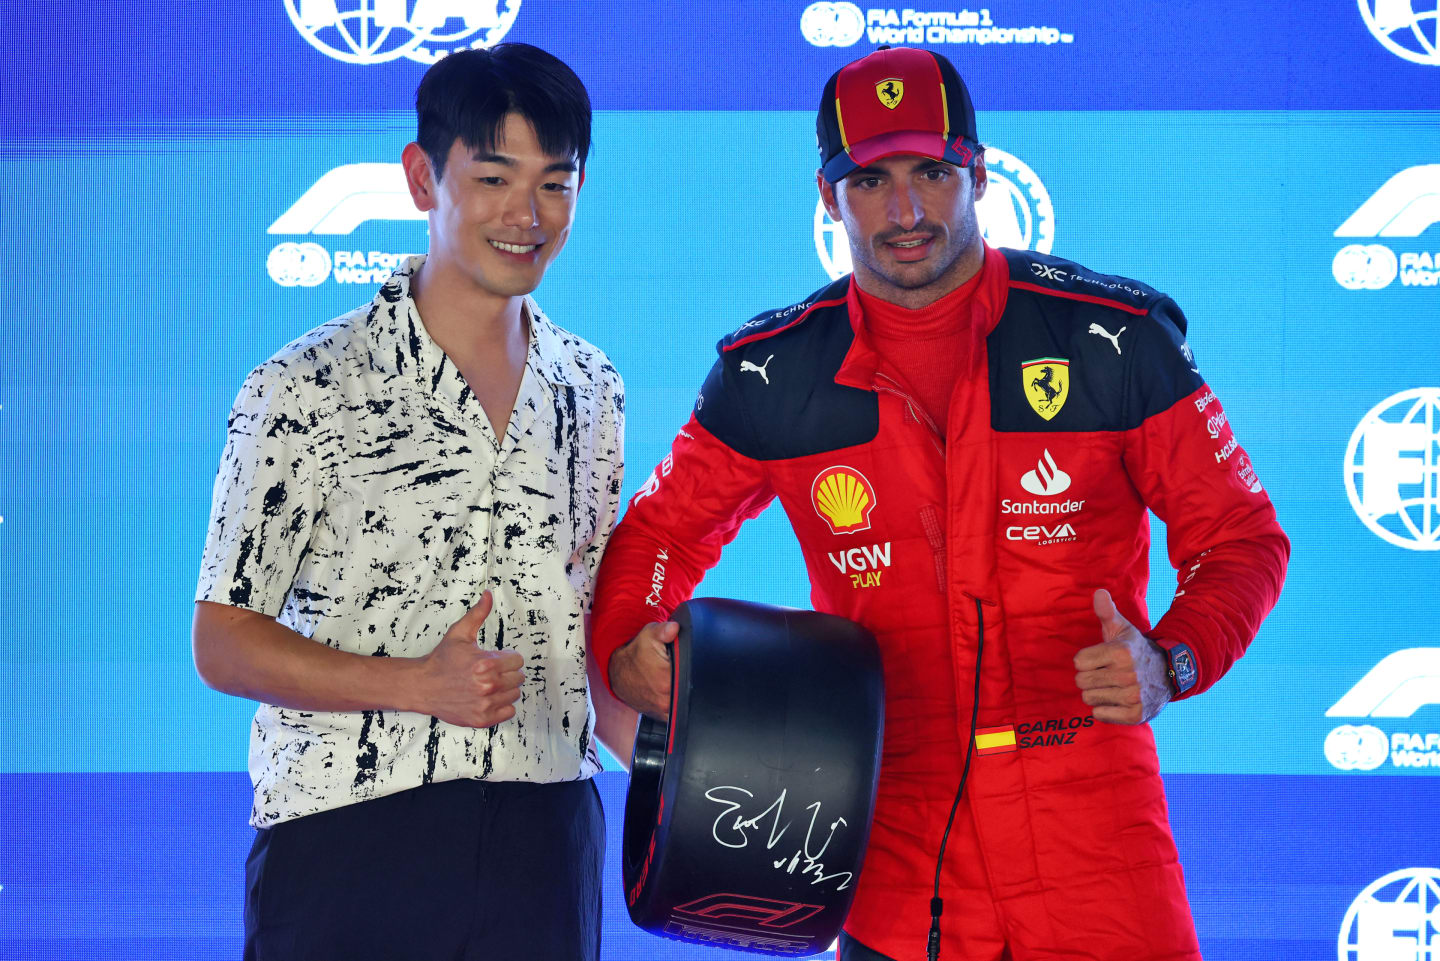 SINGAPORE, SINGAPORE - SEPTEMBER 16: Pole position qualifier Carlos Sainz of Spain and Ferrari is presented with the Pirelli Pole Position Award by Eric Nam in parc ferme during qualifying ahead of the F1 Grand Prix of Singapore at Marina Bay Street Circuit on September 16, 2023 in Singapore, Singapore. (Photo by Russell Batchelor/Getty Images)